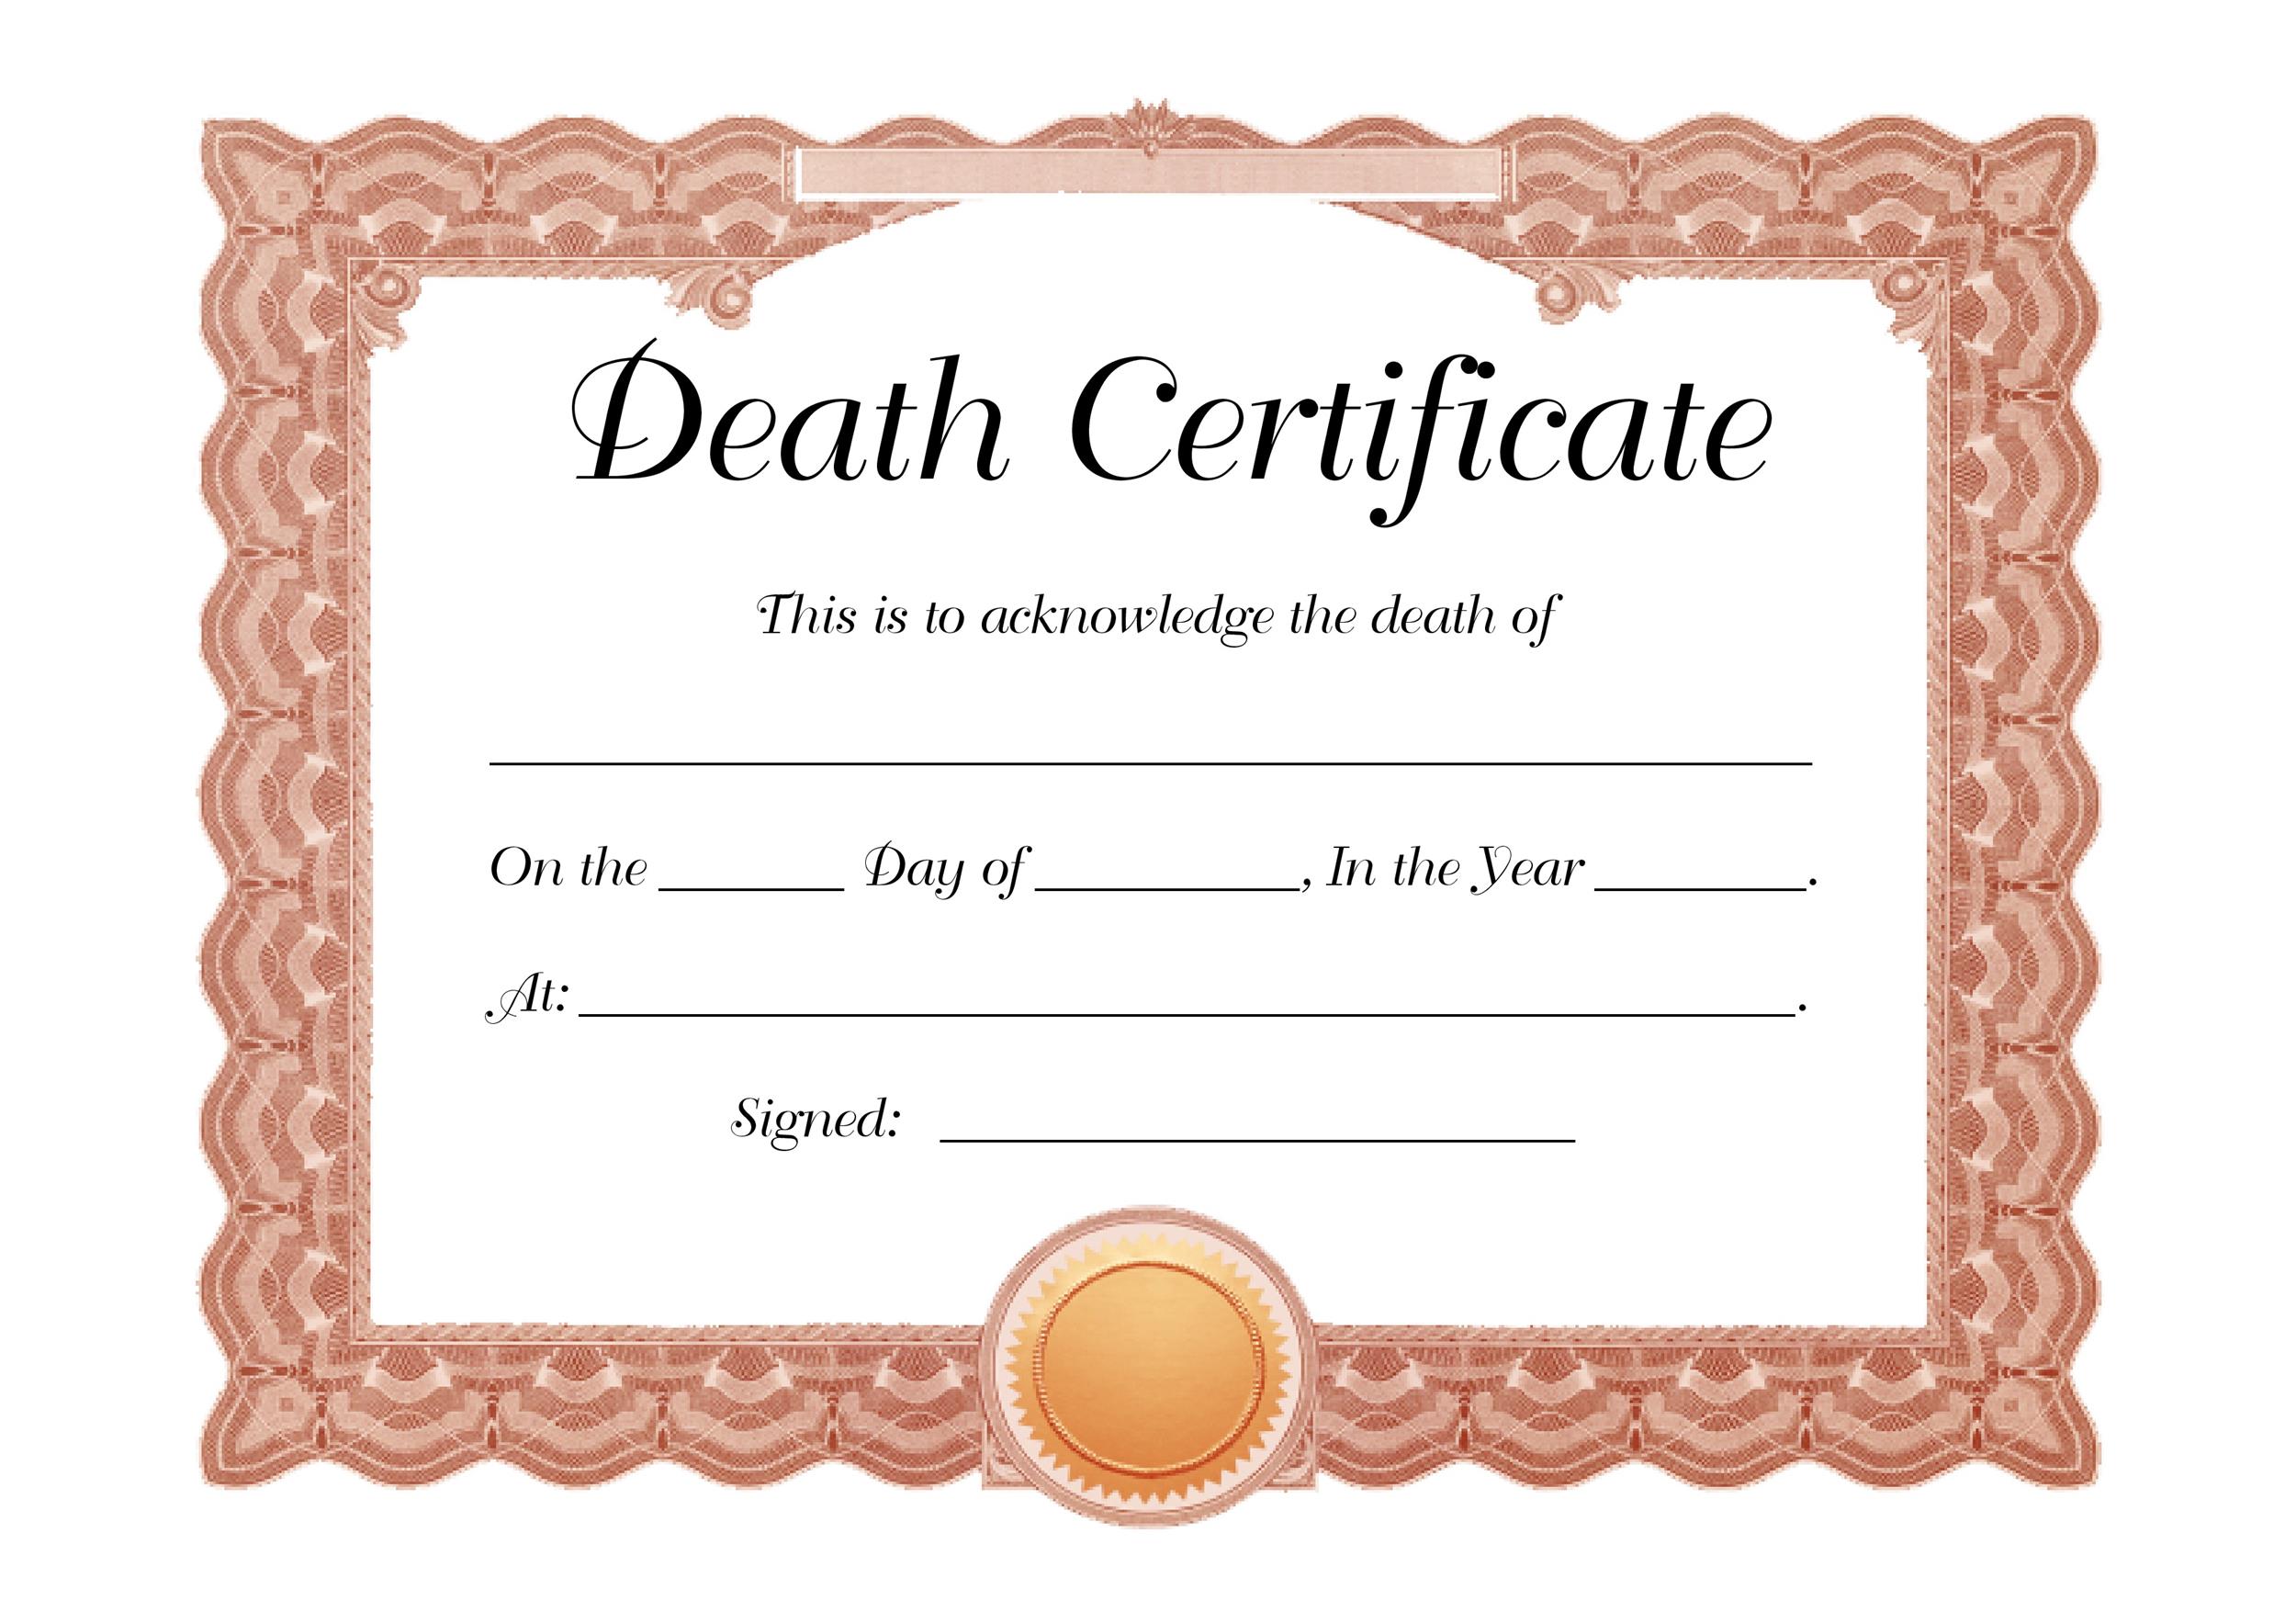 free-death-certificate-translation-template-of-august-2007-heritagechristiancollege